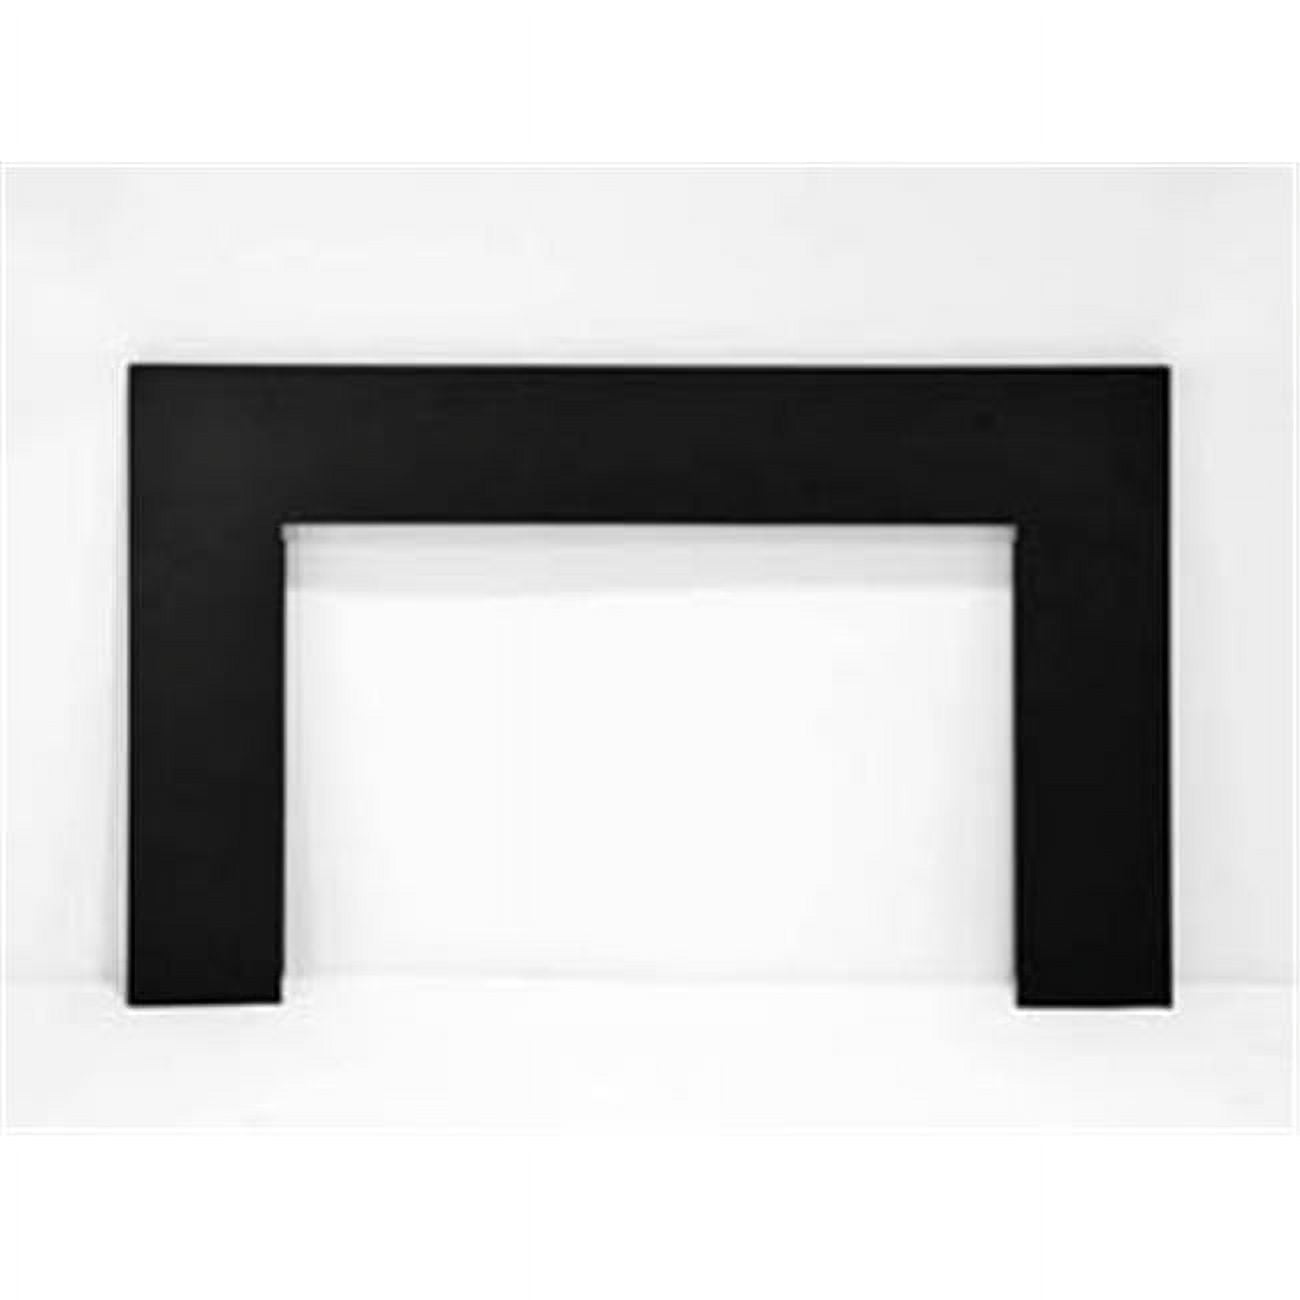 Picture of Amantii TRD-30-3 3 Side Trim Kit for TRD-30 Fireplace